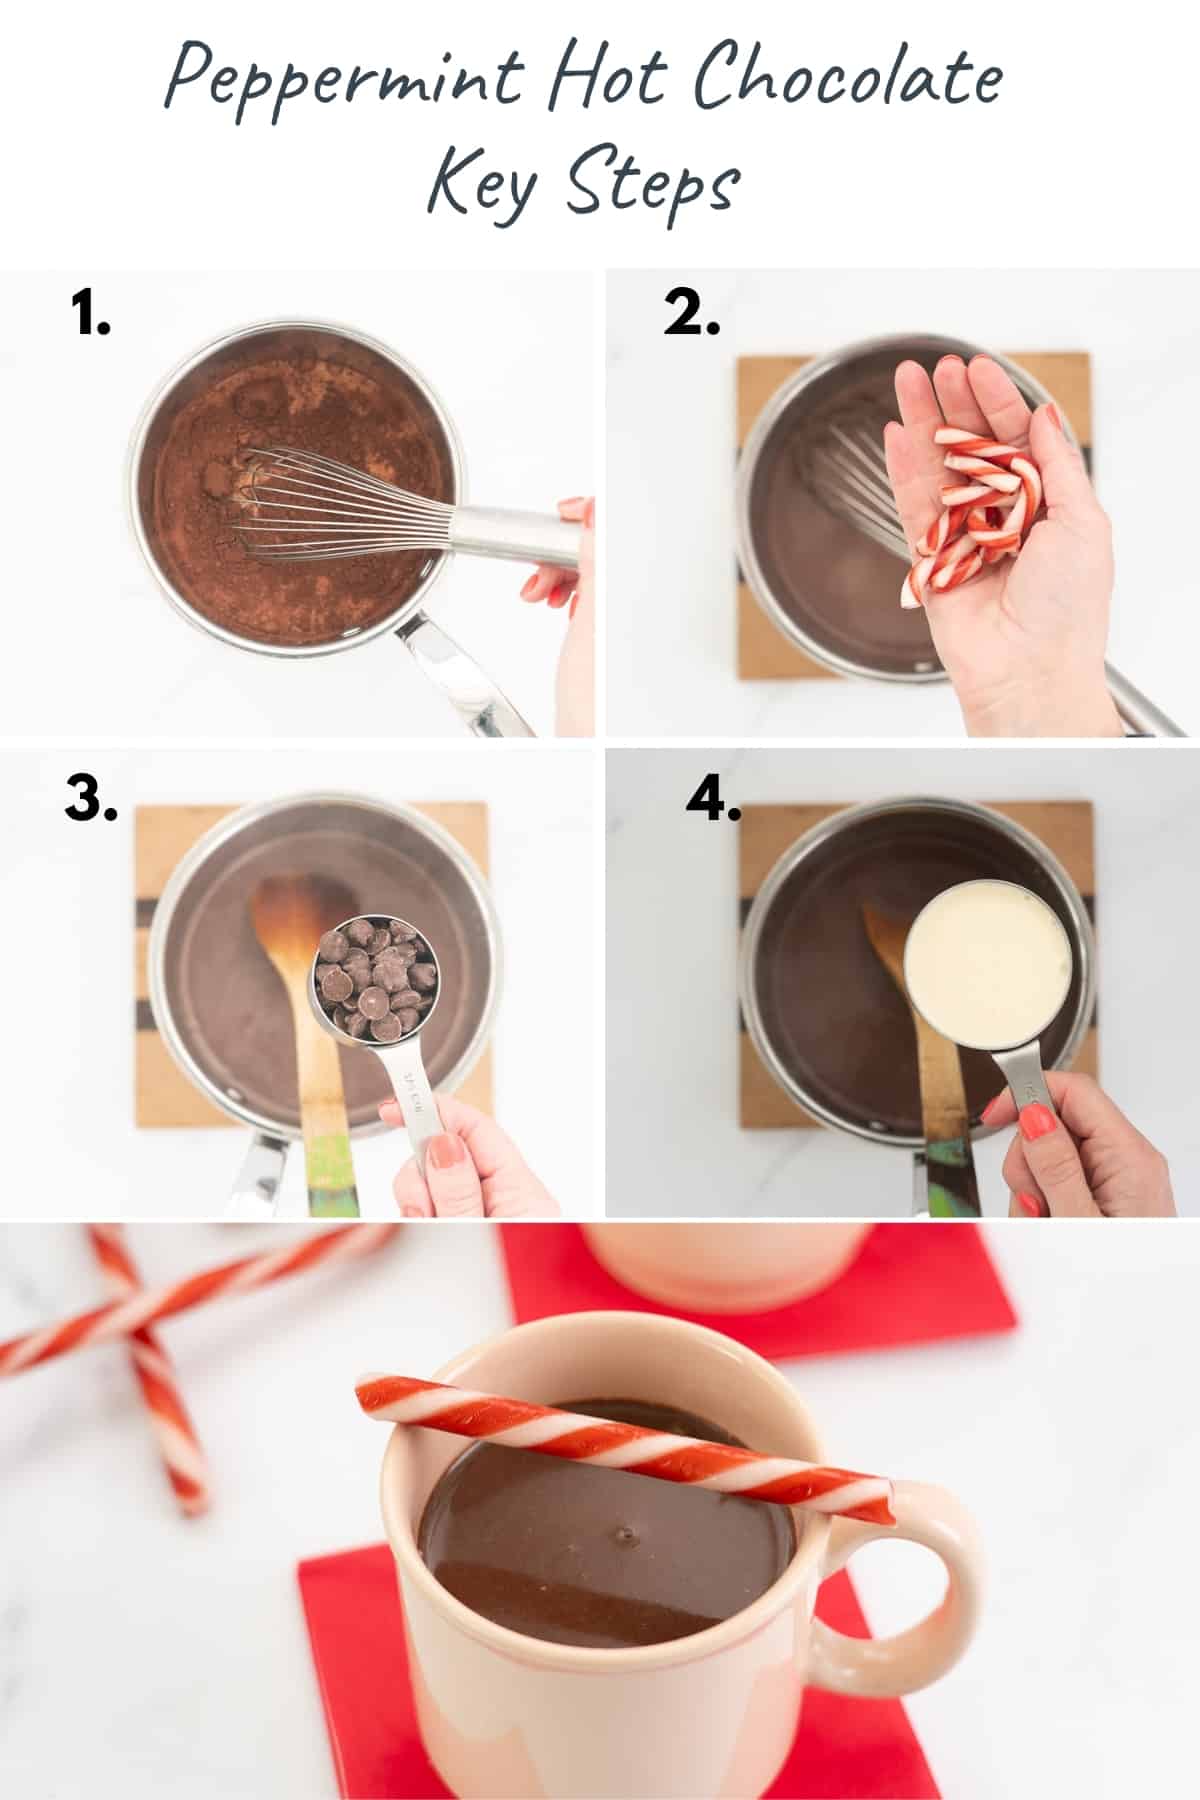 5 photo collage showing the key steps to making peppermint hot chocolates